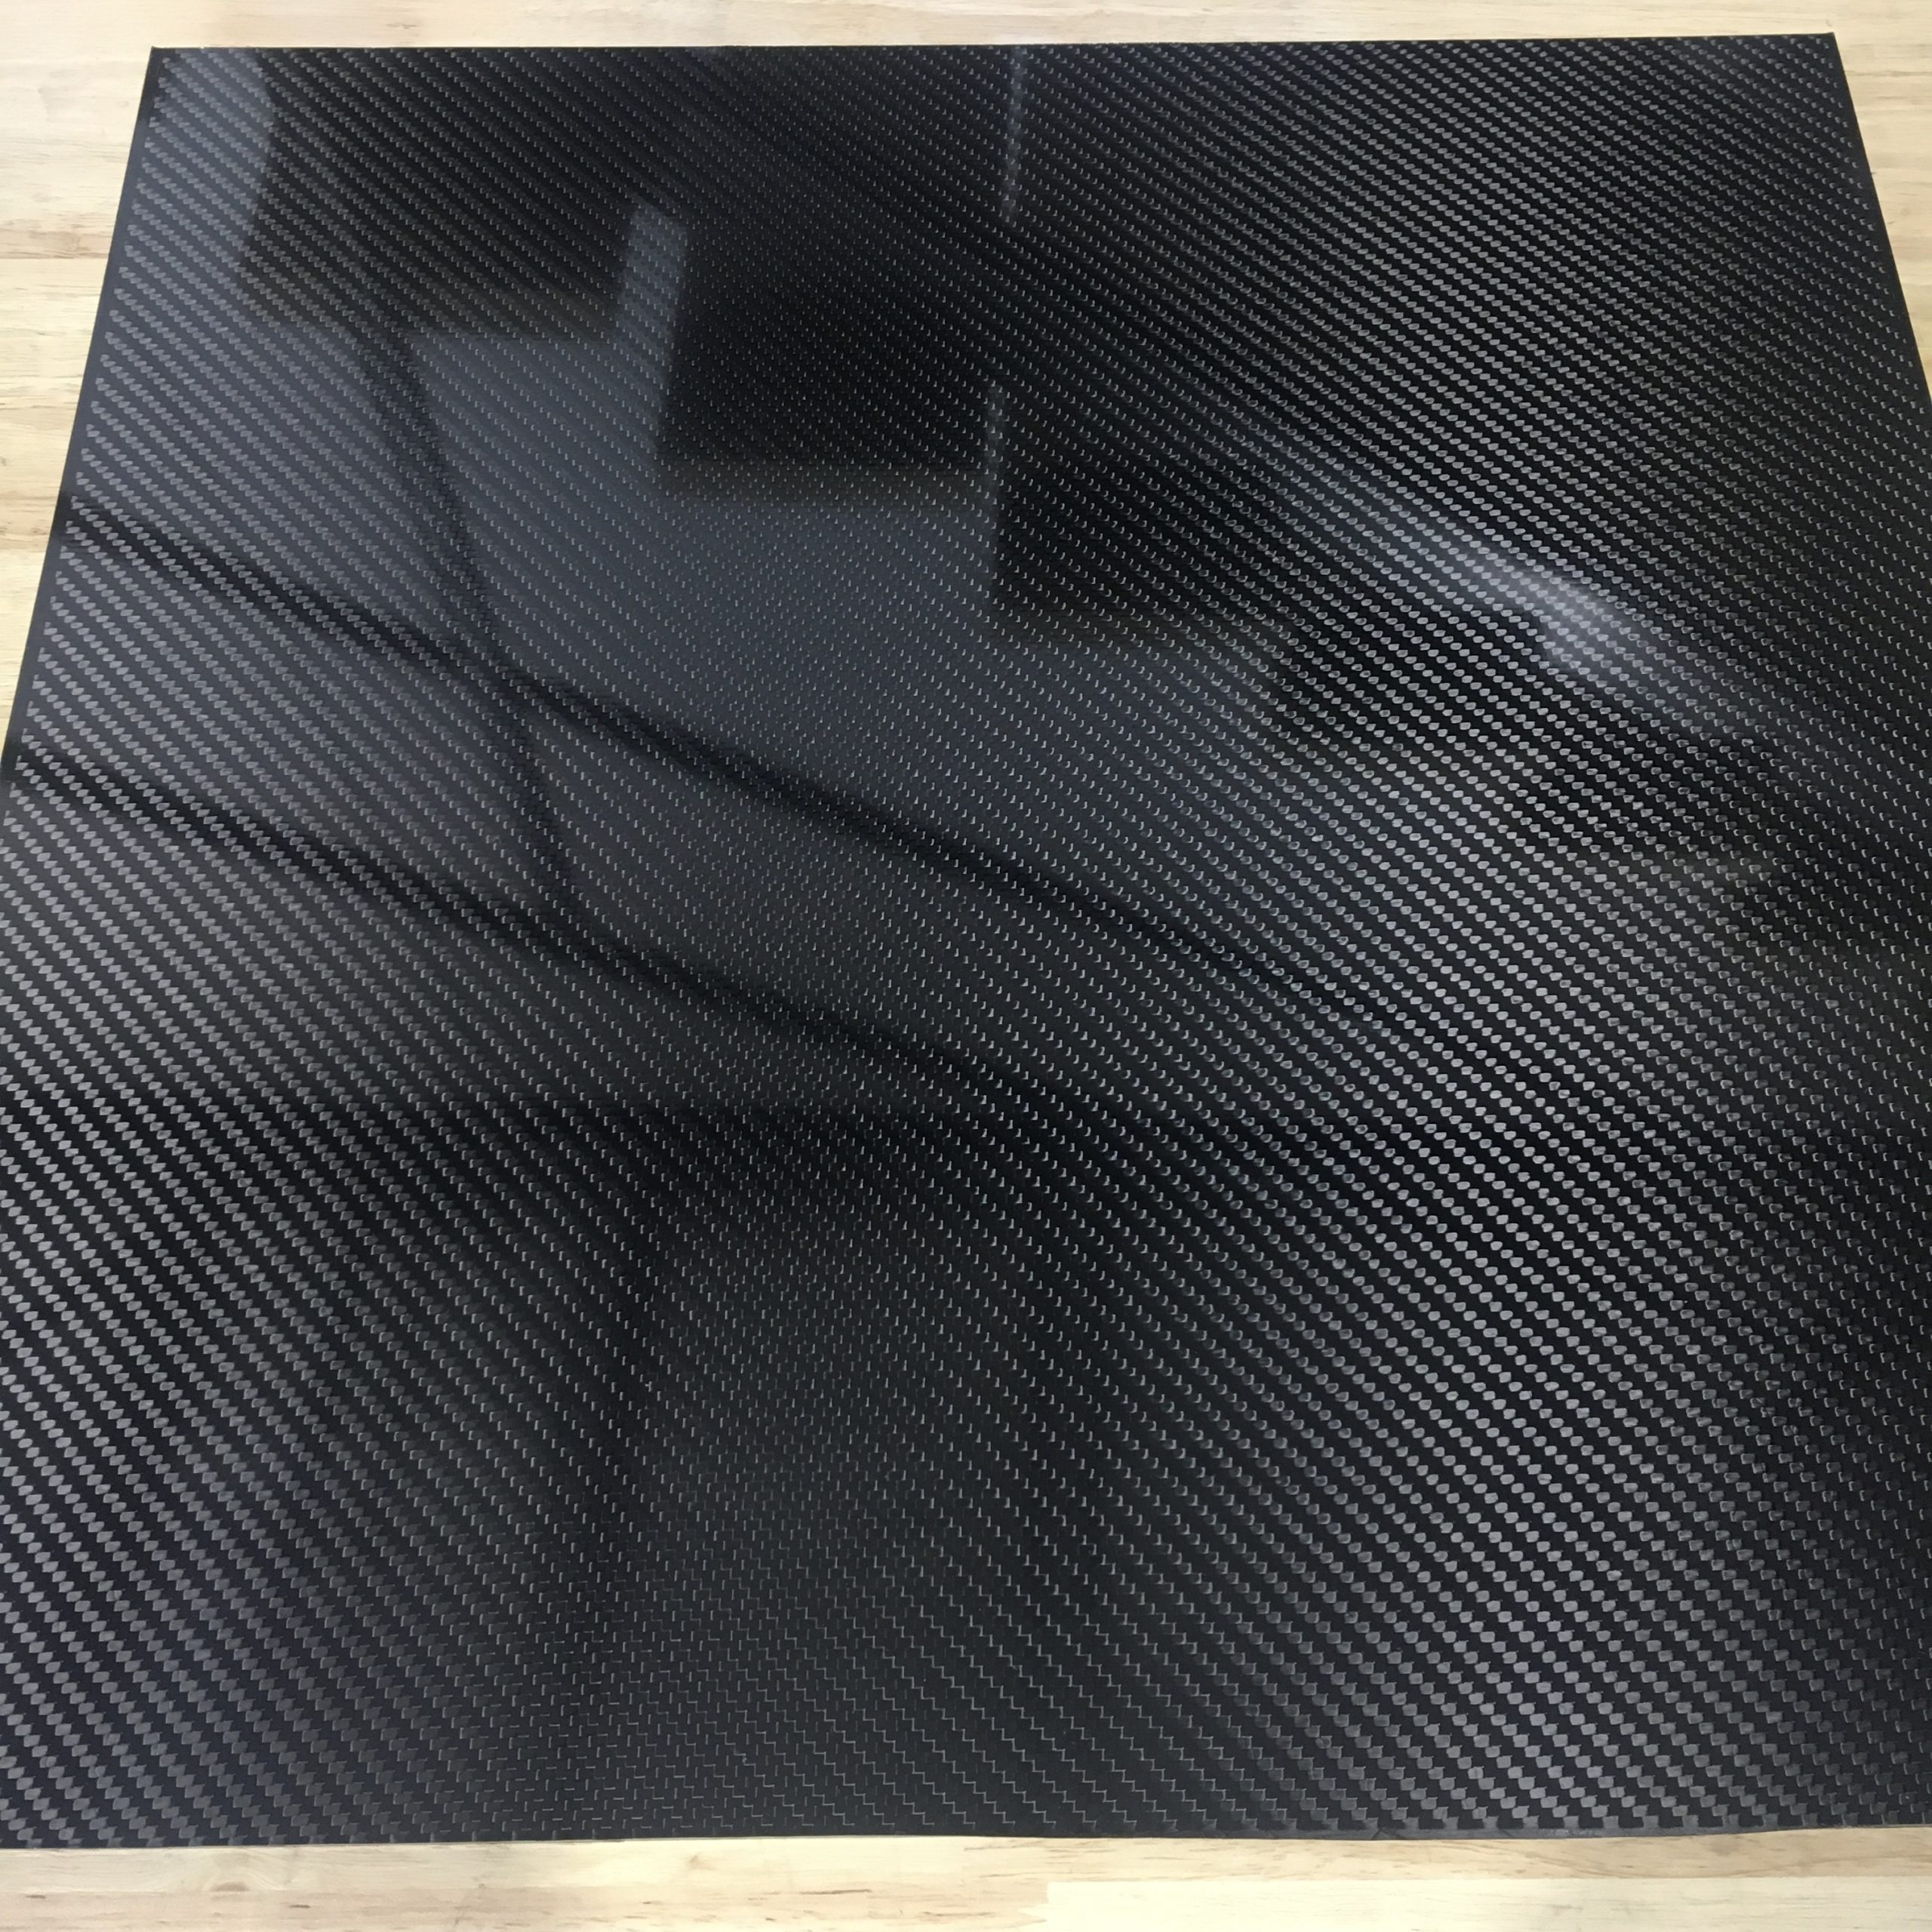 Twill Glossy Carbon Fibre Plate